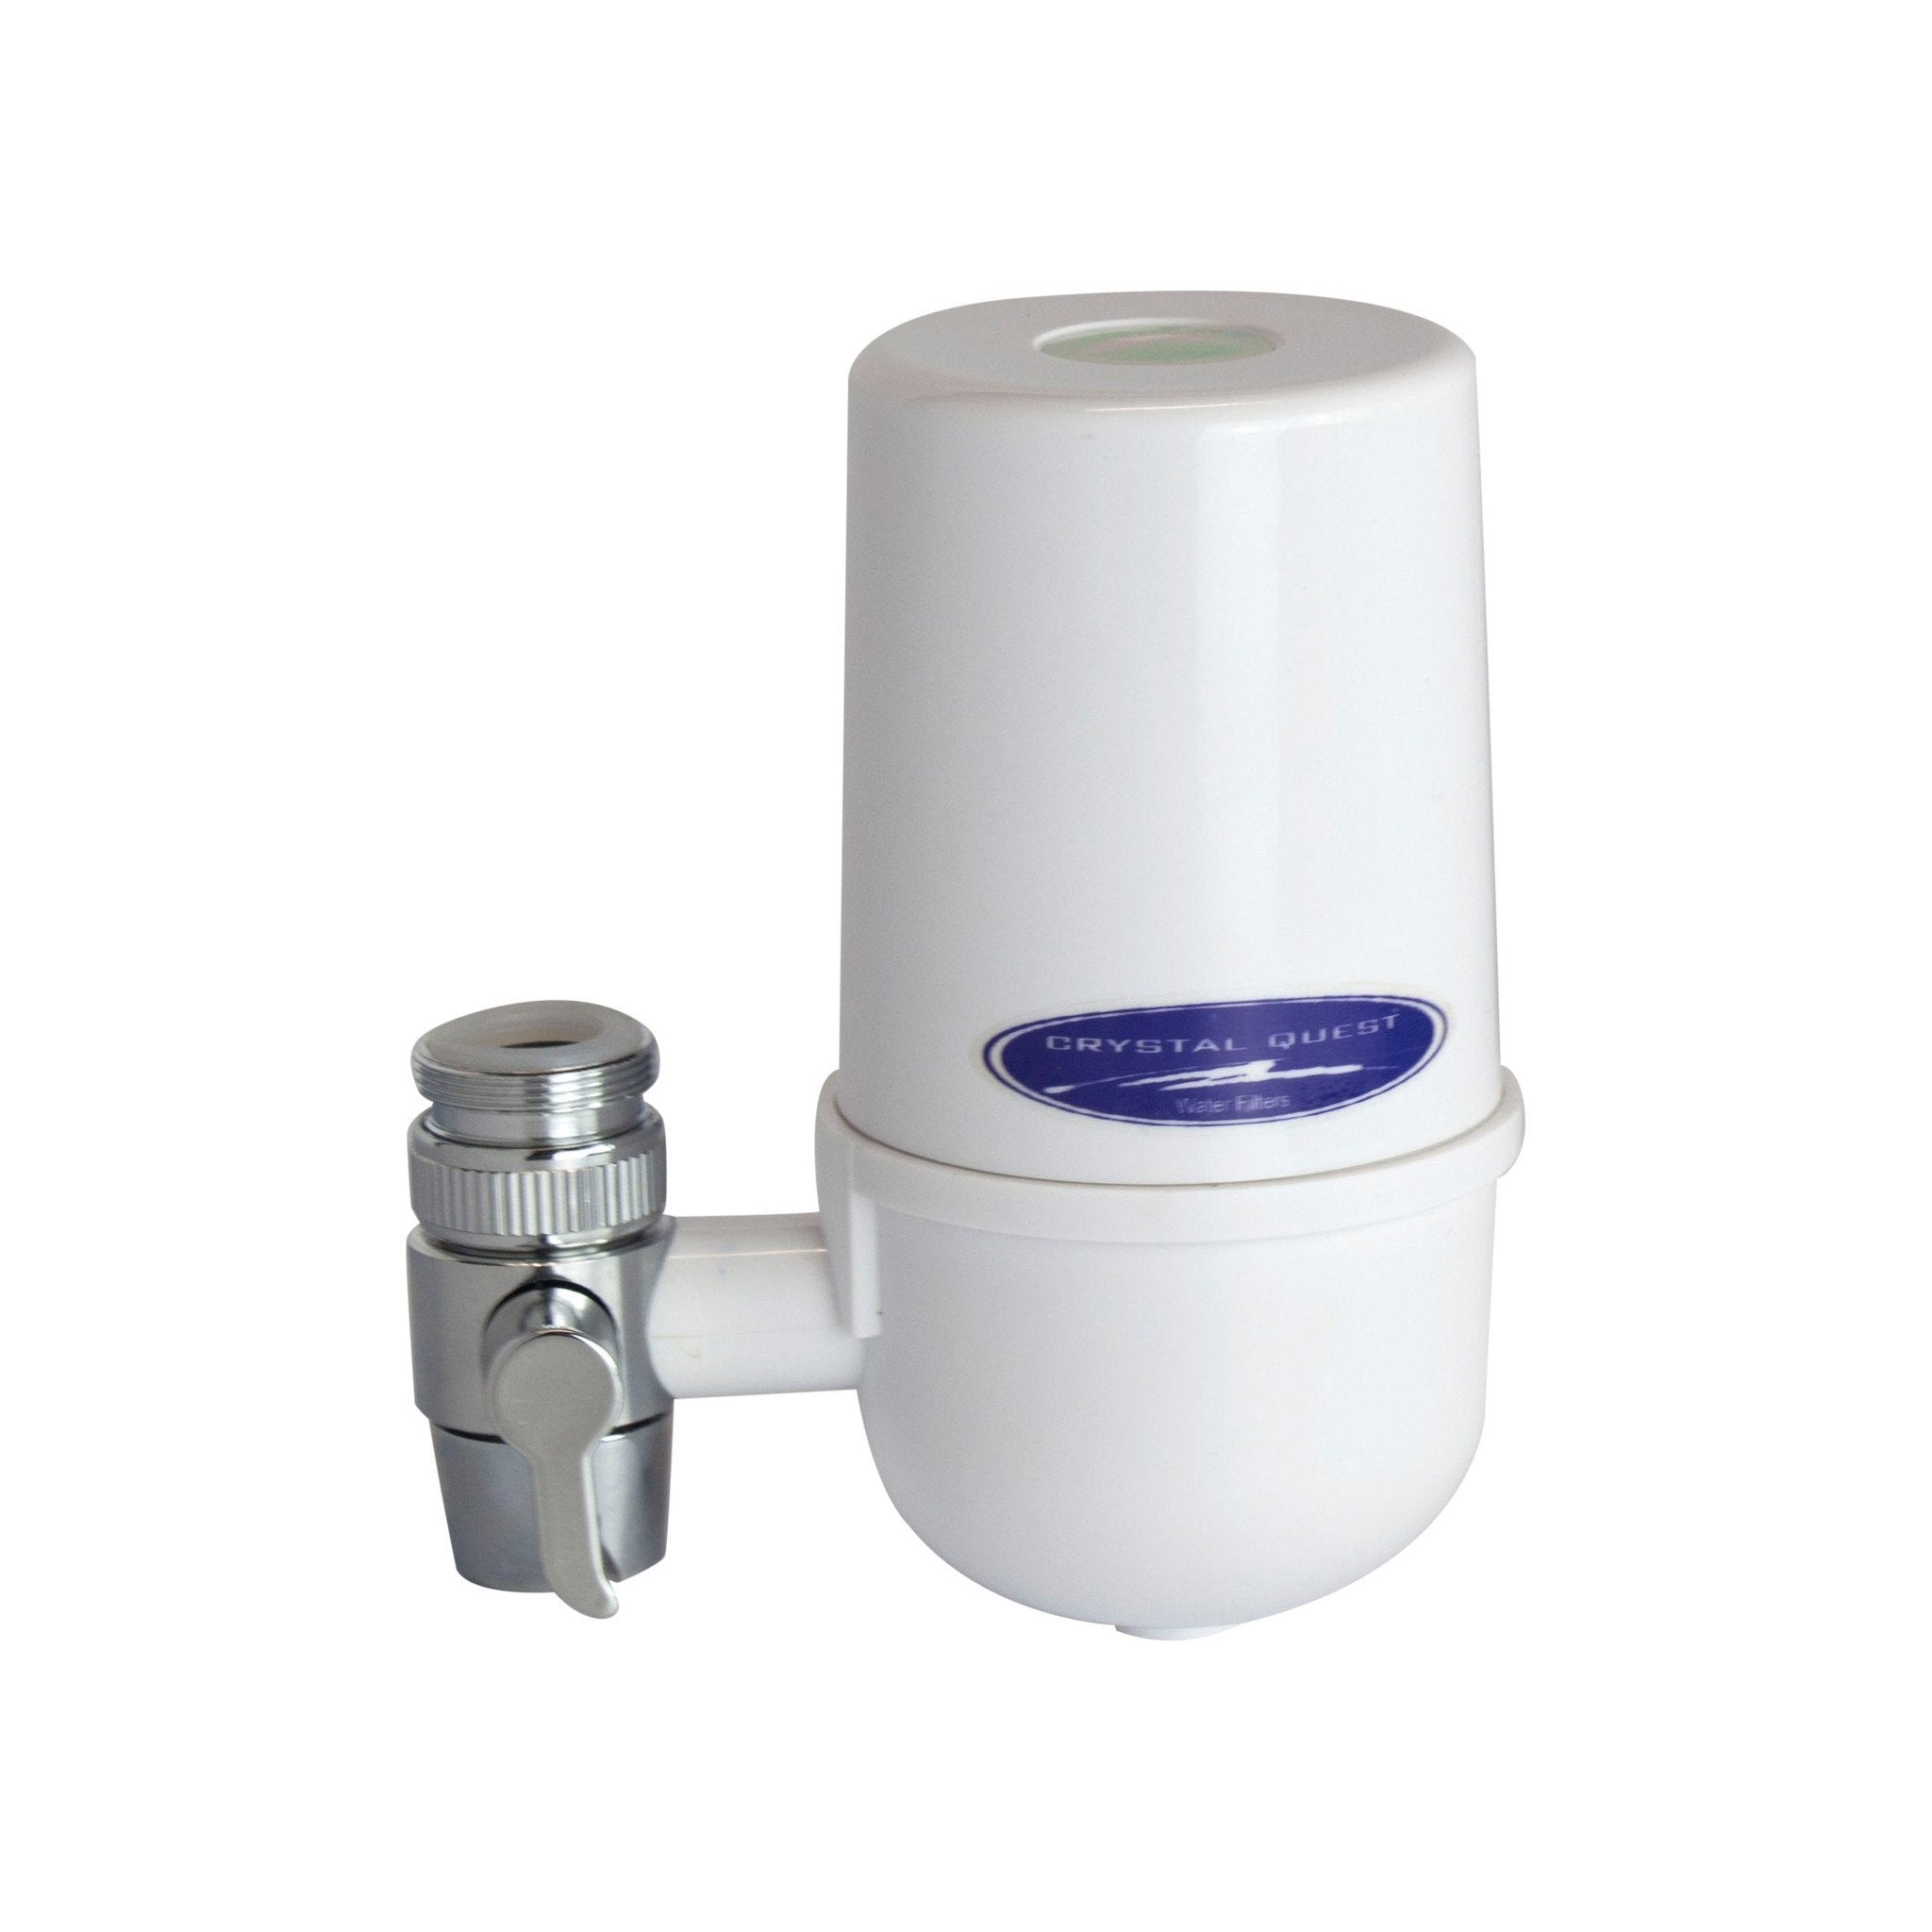 White Faucet Mount Water Filter System (6 Stages) - Faucet Mount Water Filters - Crystal Quest